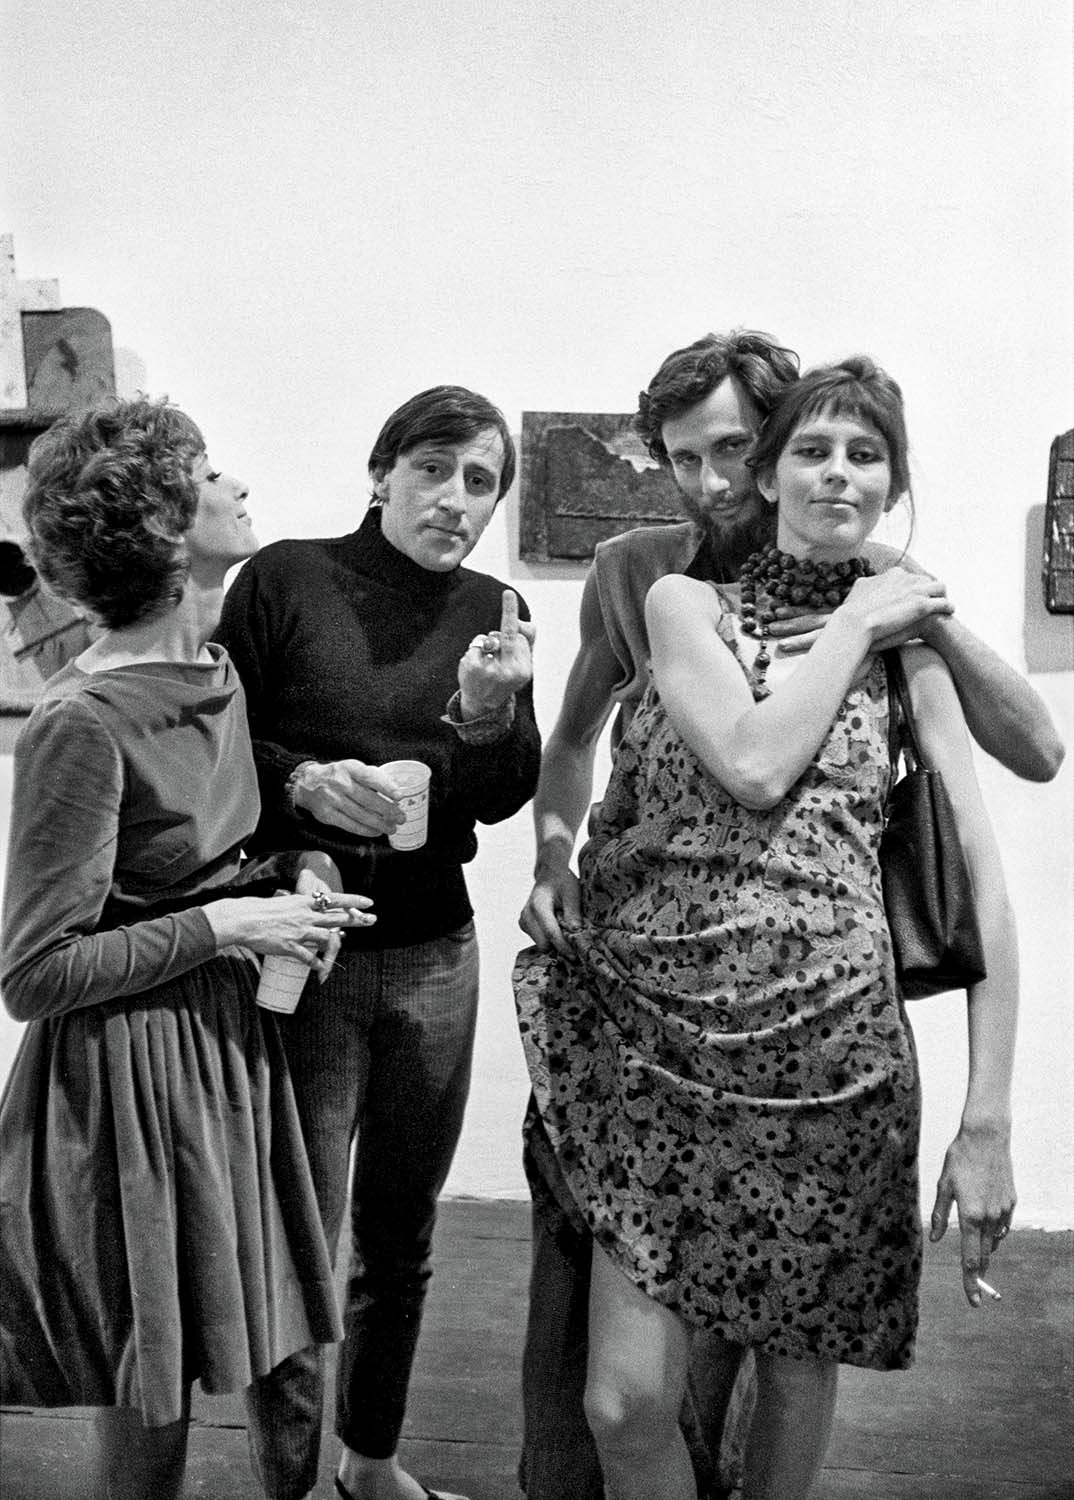  WALLACE BERMAN GEORGE HERMS   Shirley, Wallace, George, and Louise at the opening of George Herms exhibition, Aura Gallery, 1963.  